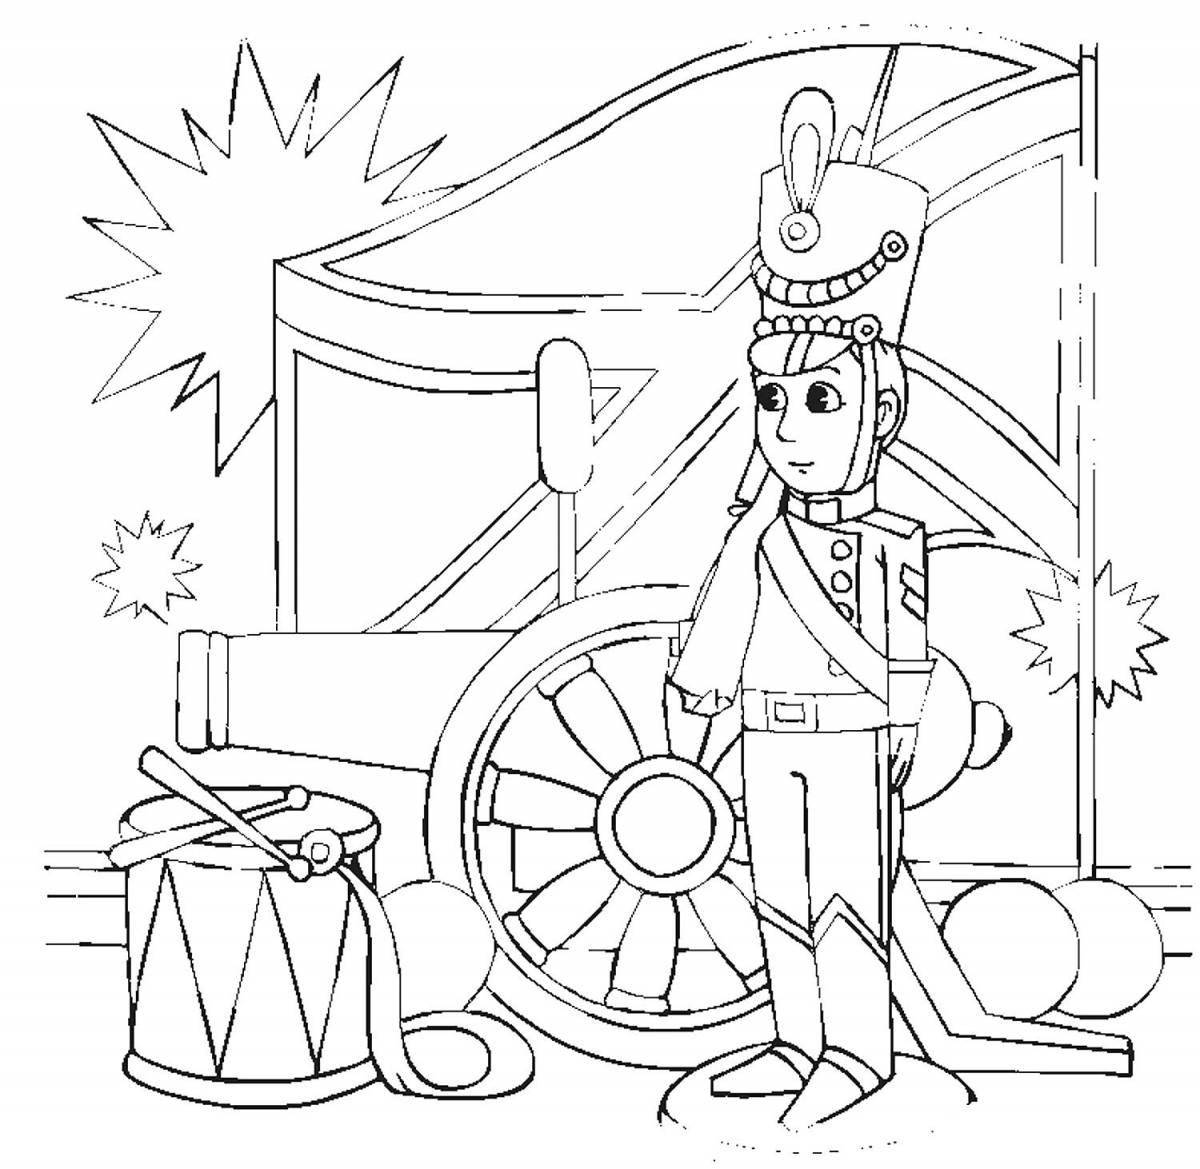 Playful fire starter coloring page for kids